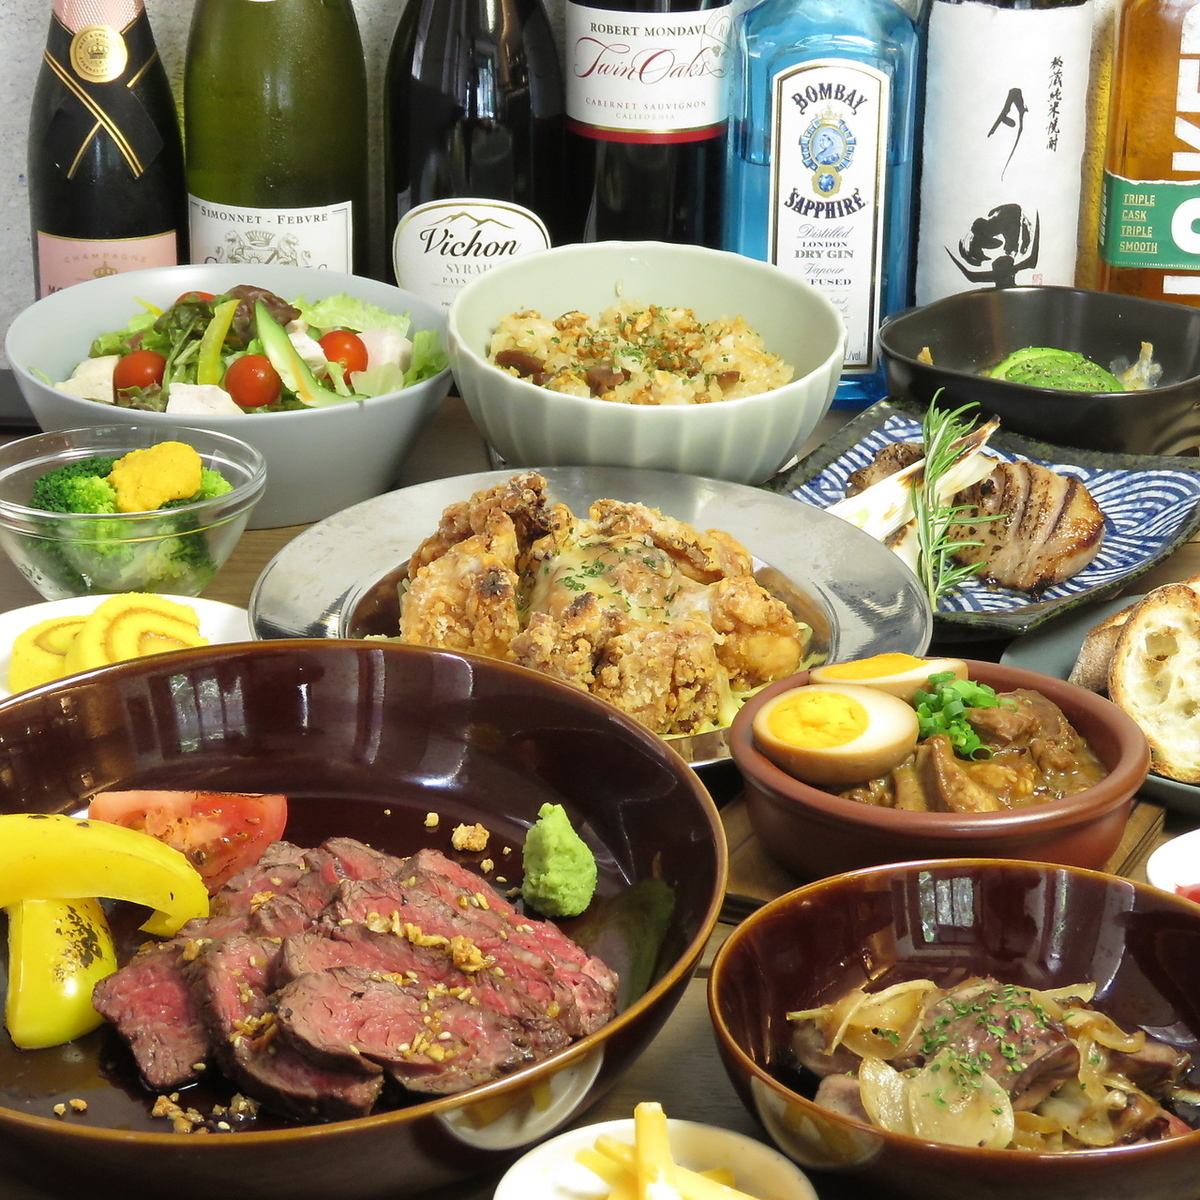 All-you-can-drink for 2 hours! All 7 dishes with dessert _ Ichiyo satisfaction course _ 5500 yen